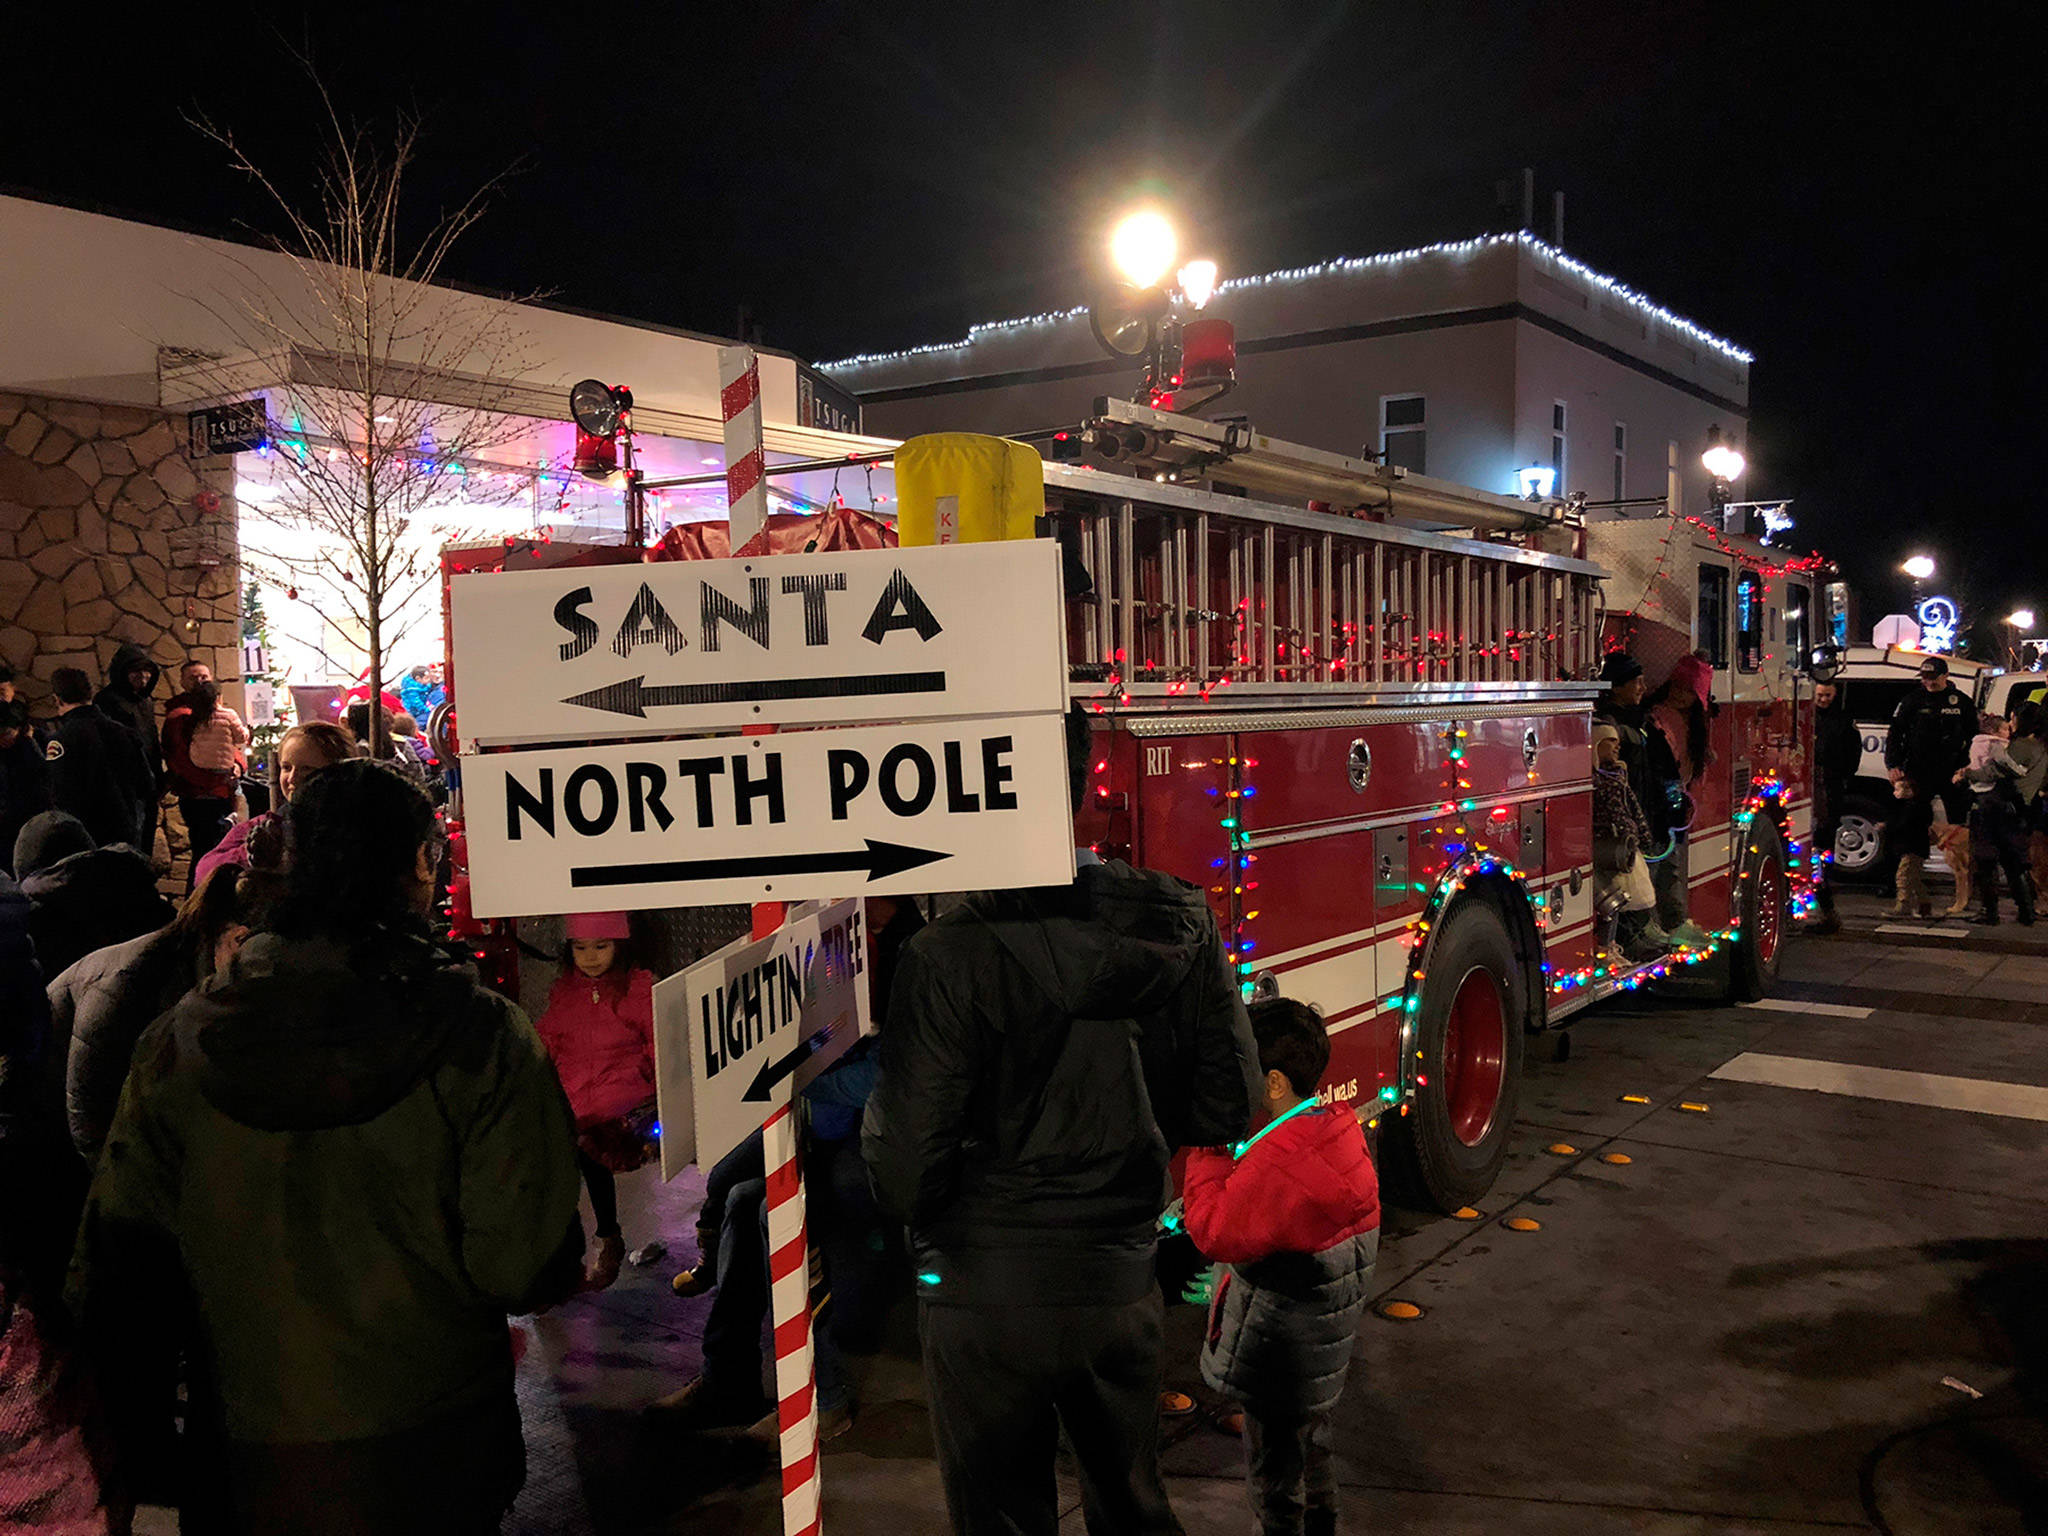 Santa arrived by fire truck to Bothell’s holiday event. Photo courtesy of the city of Bothell